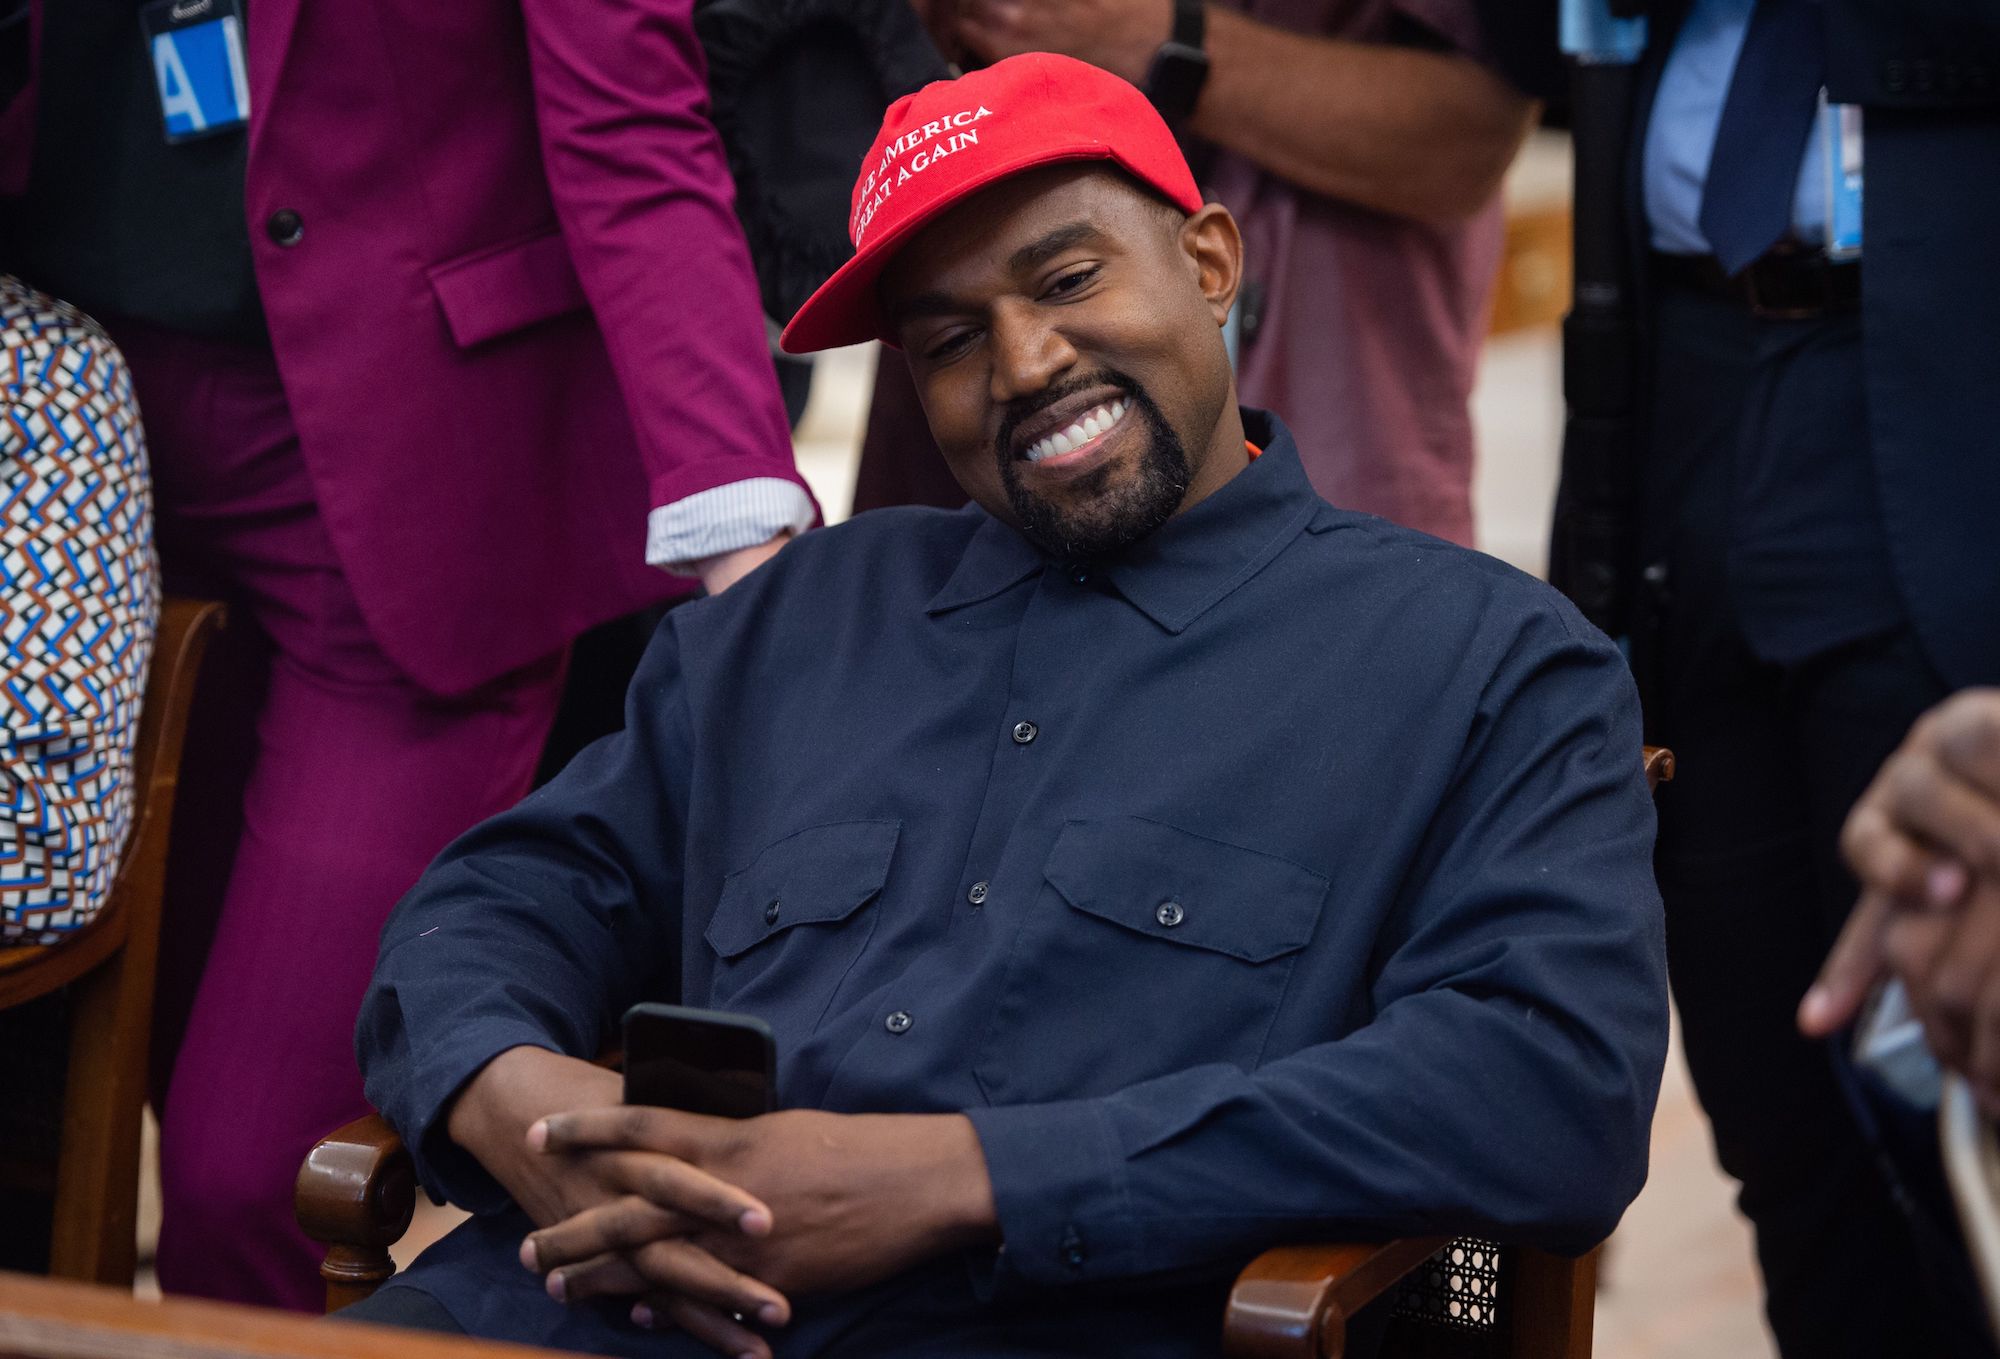 Kanye West smiling looking away from the camera wearing a red hat that says 'Make America Great Again'